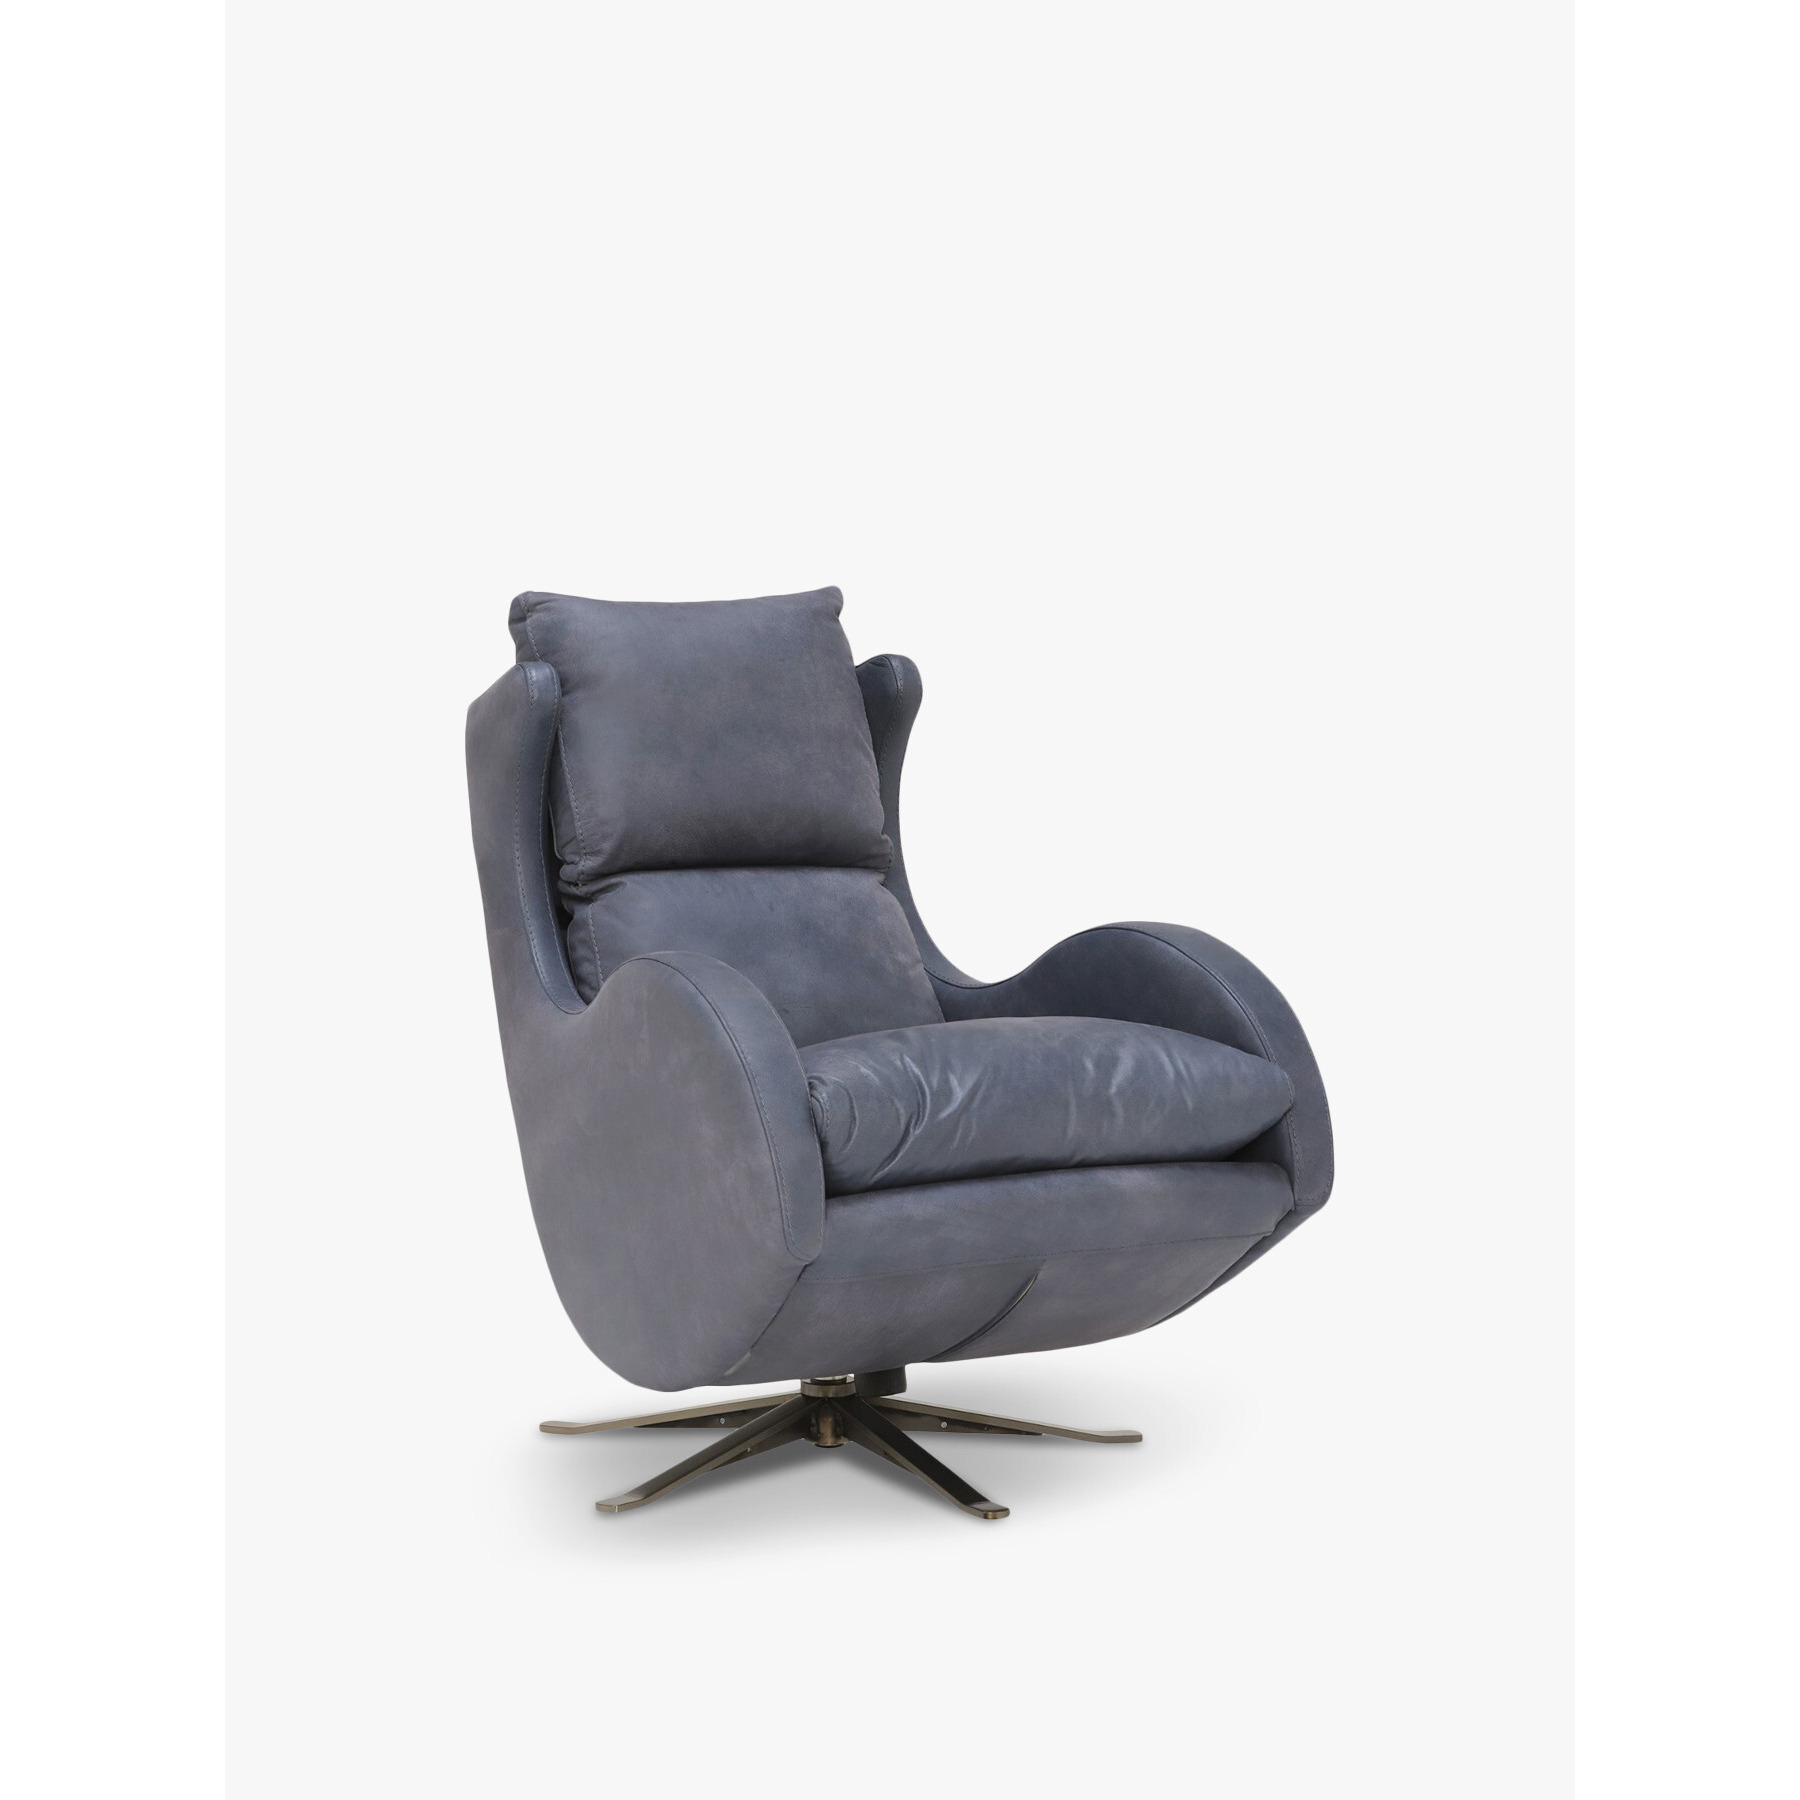 Barker and Stonehouse Fama Lenny Rocking Swivel Armchair, Leather Blue - image 1